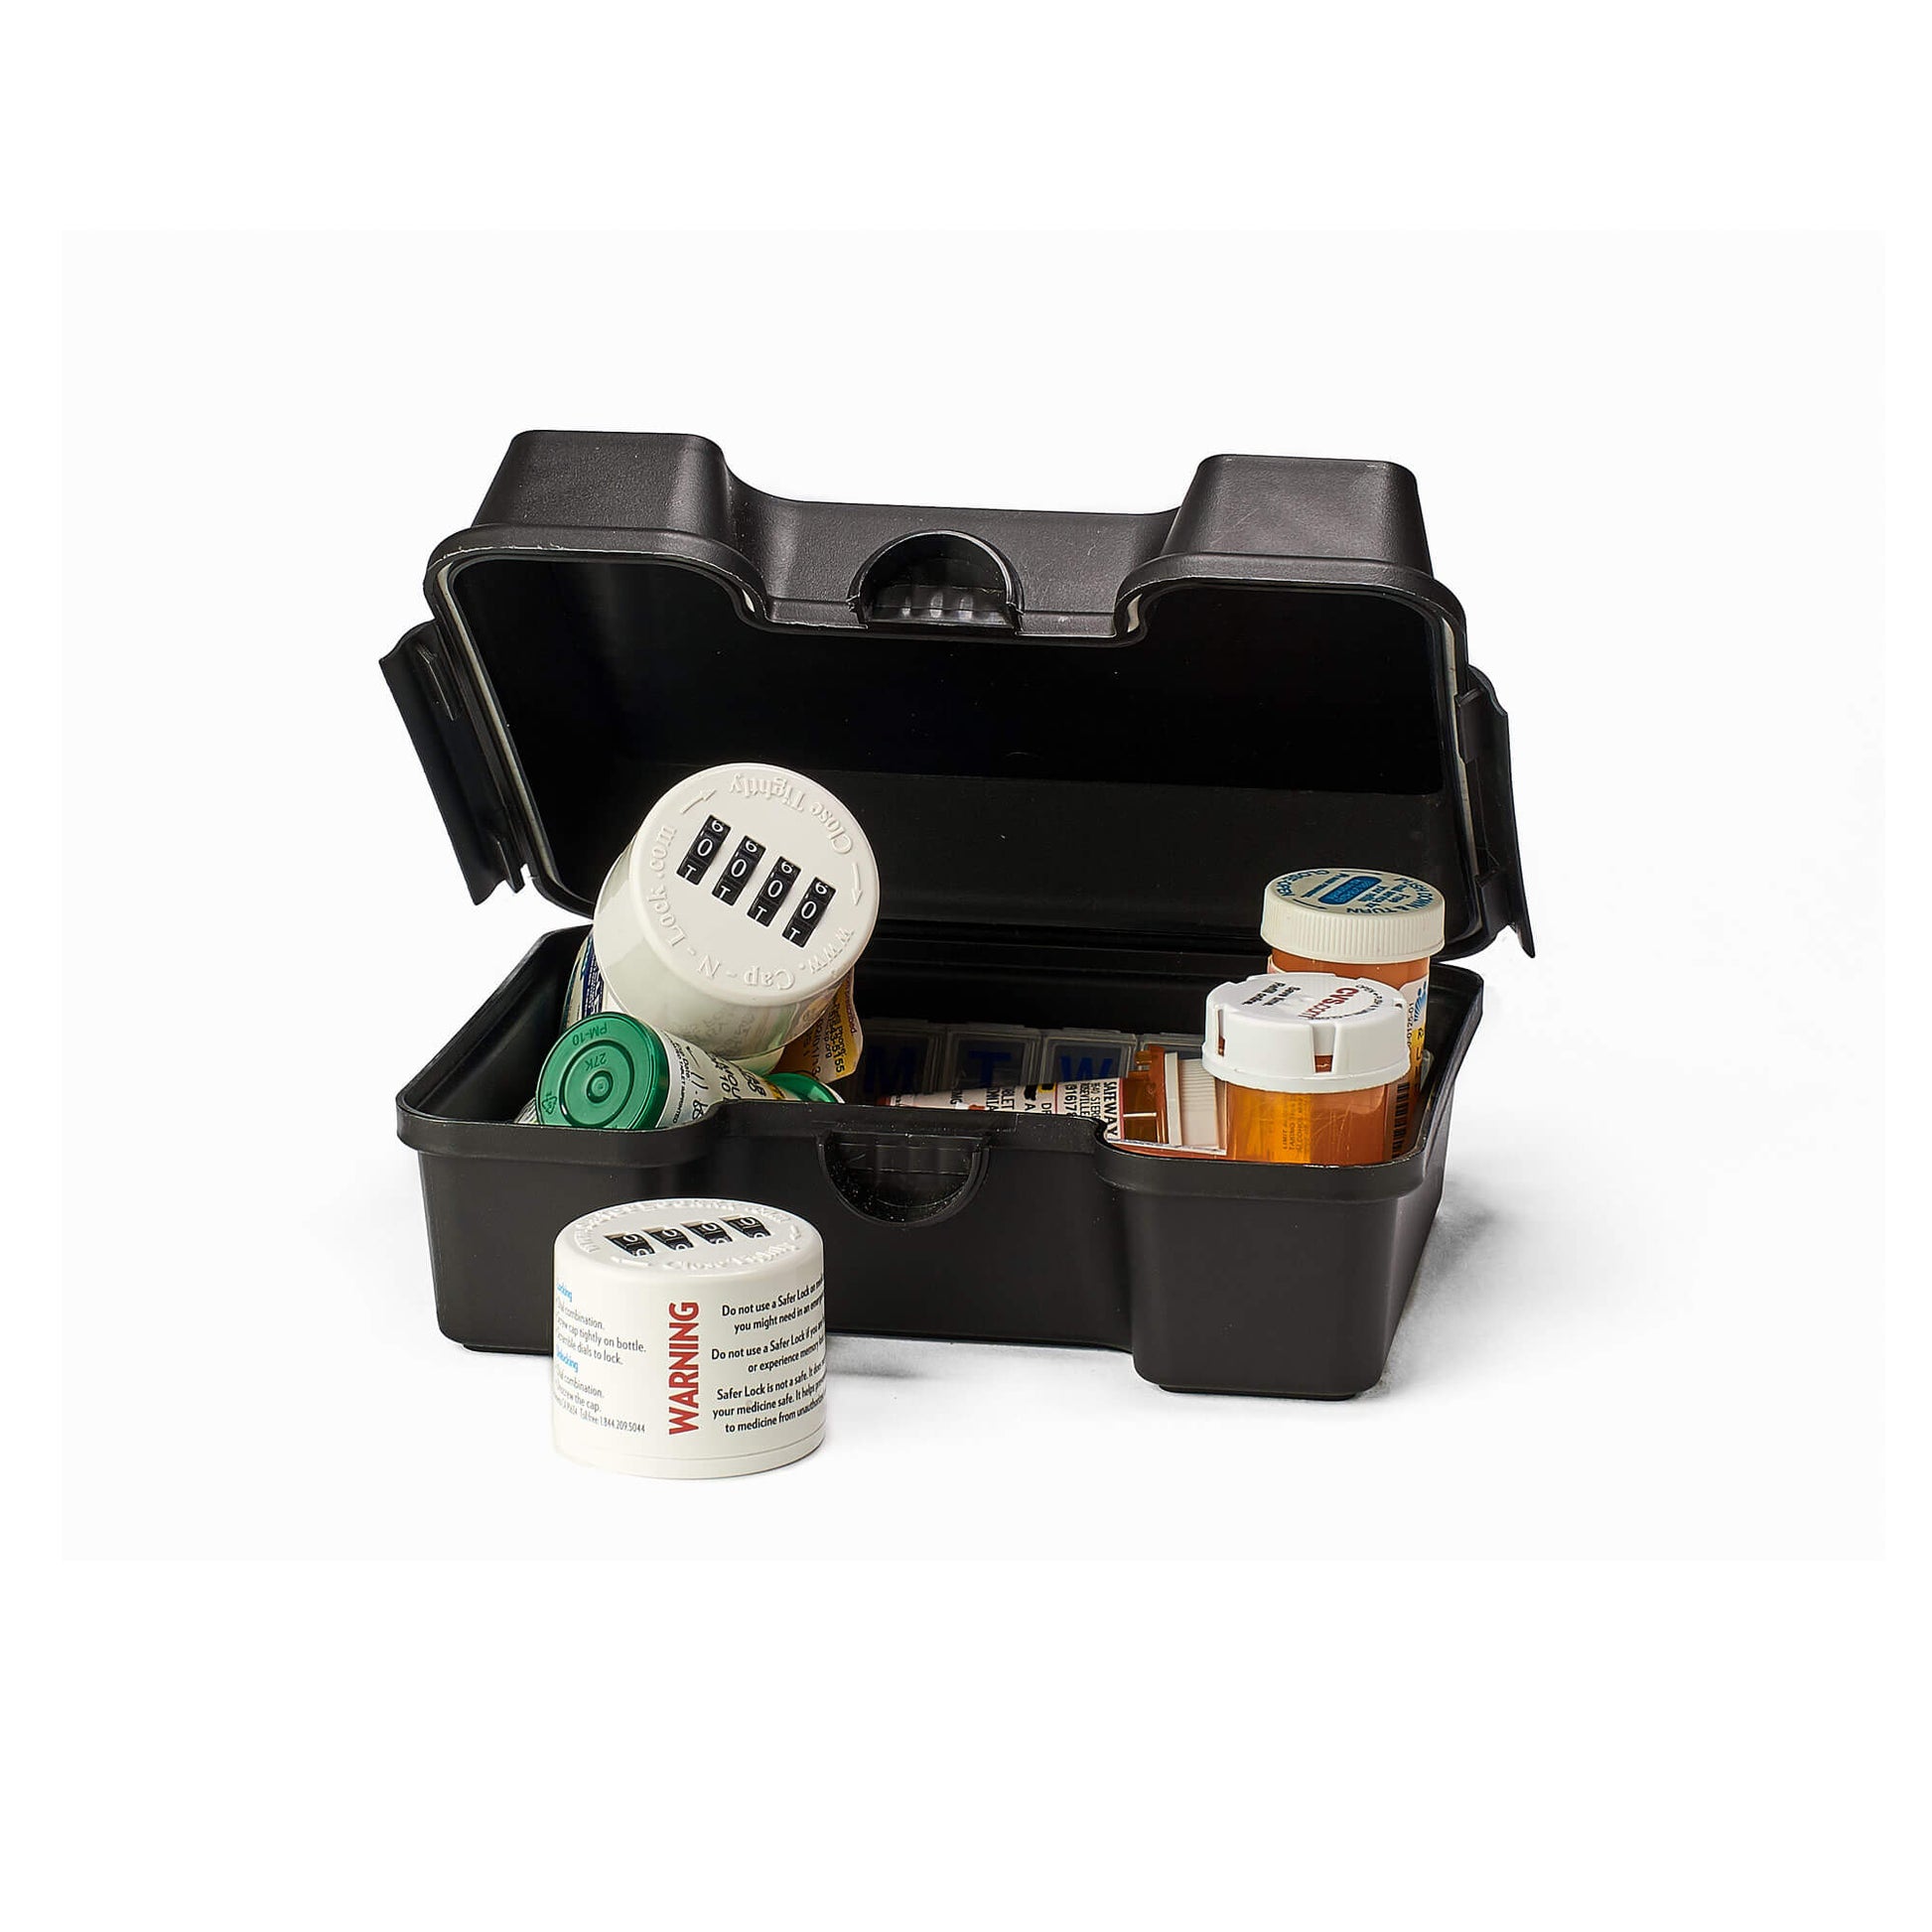 The Safer Lock box, a black box with a white cap and combination lock. The box is open showing pill bottles inside.